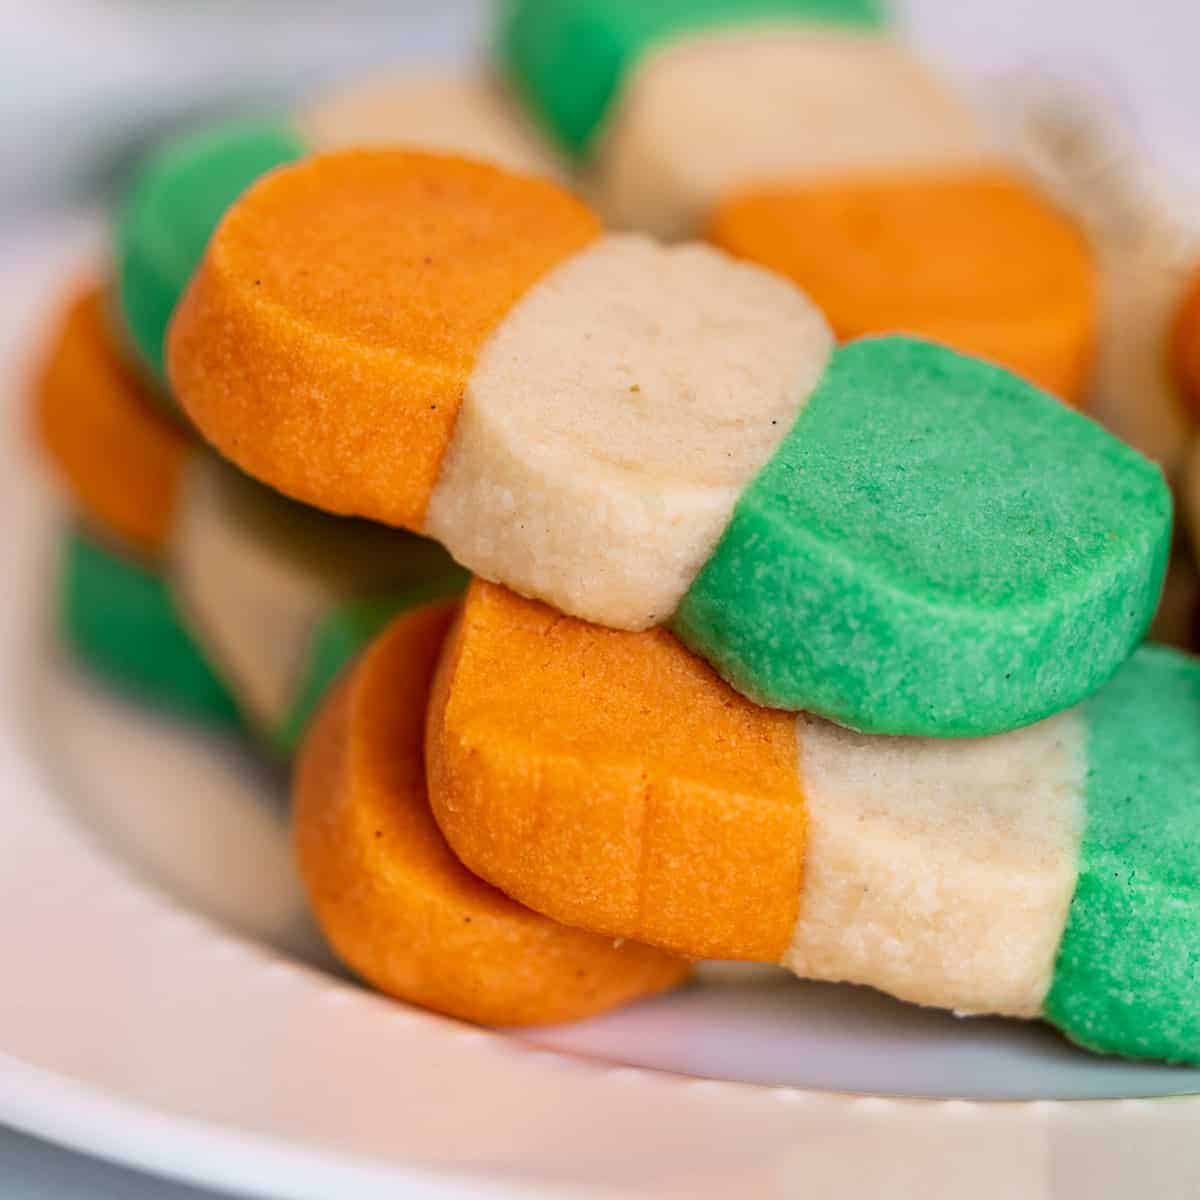 Irish-colored flag shortbread cookies on a white plate. Cookies are orange, white, and green.